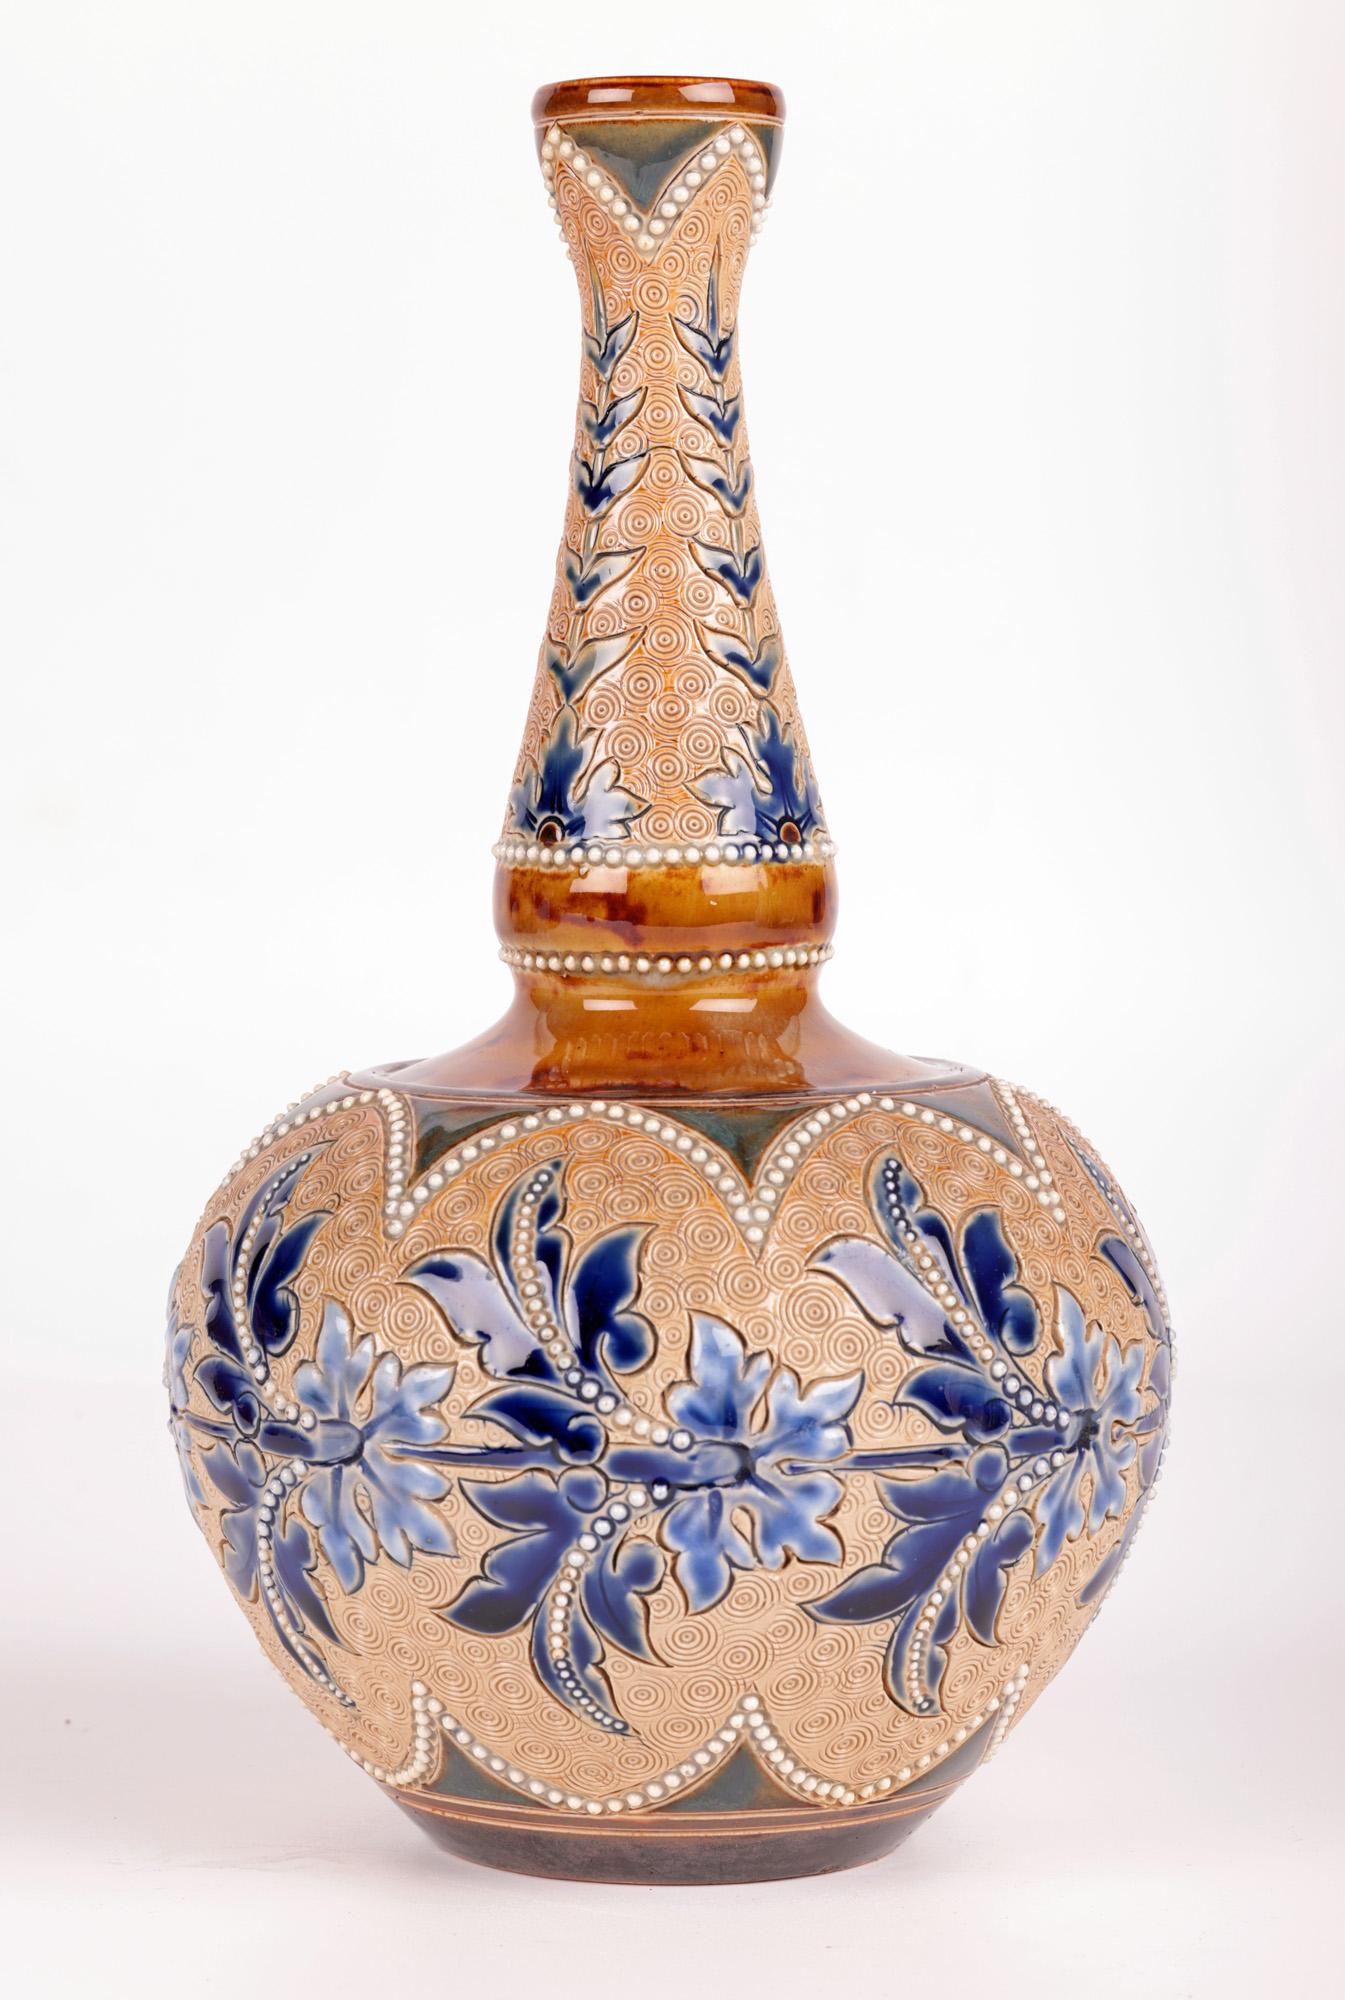 Late 19th Century Doulton Lambeth Art Union of London Floral Vase by Emily E Stormer  For Sale